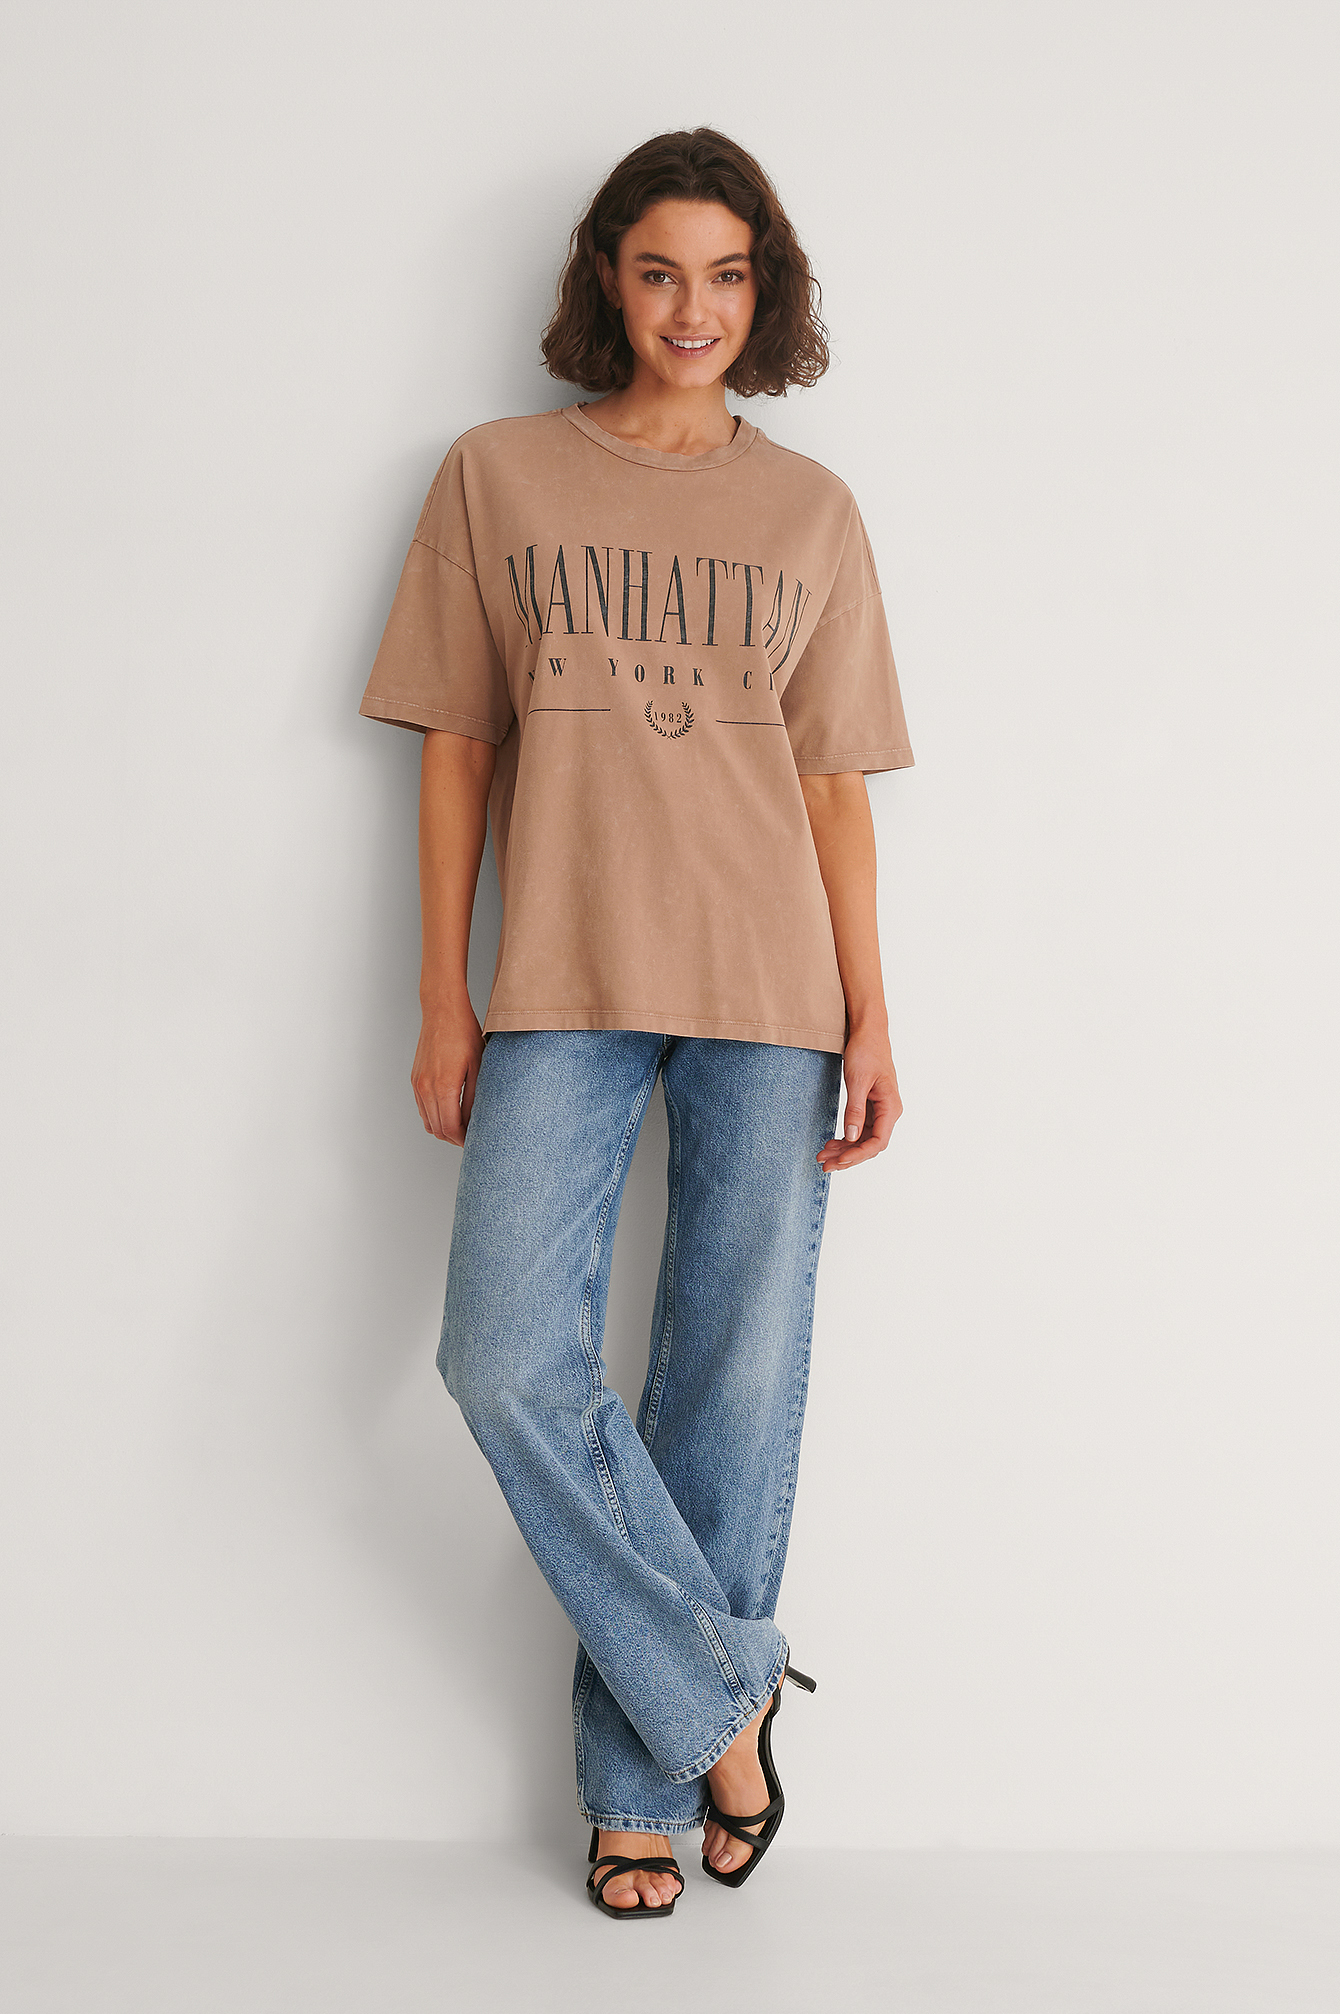 Manhattan Printed Tee Outfit.